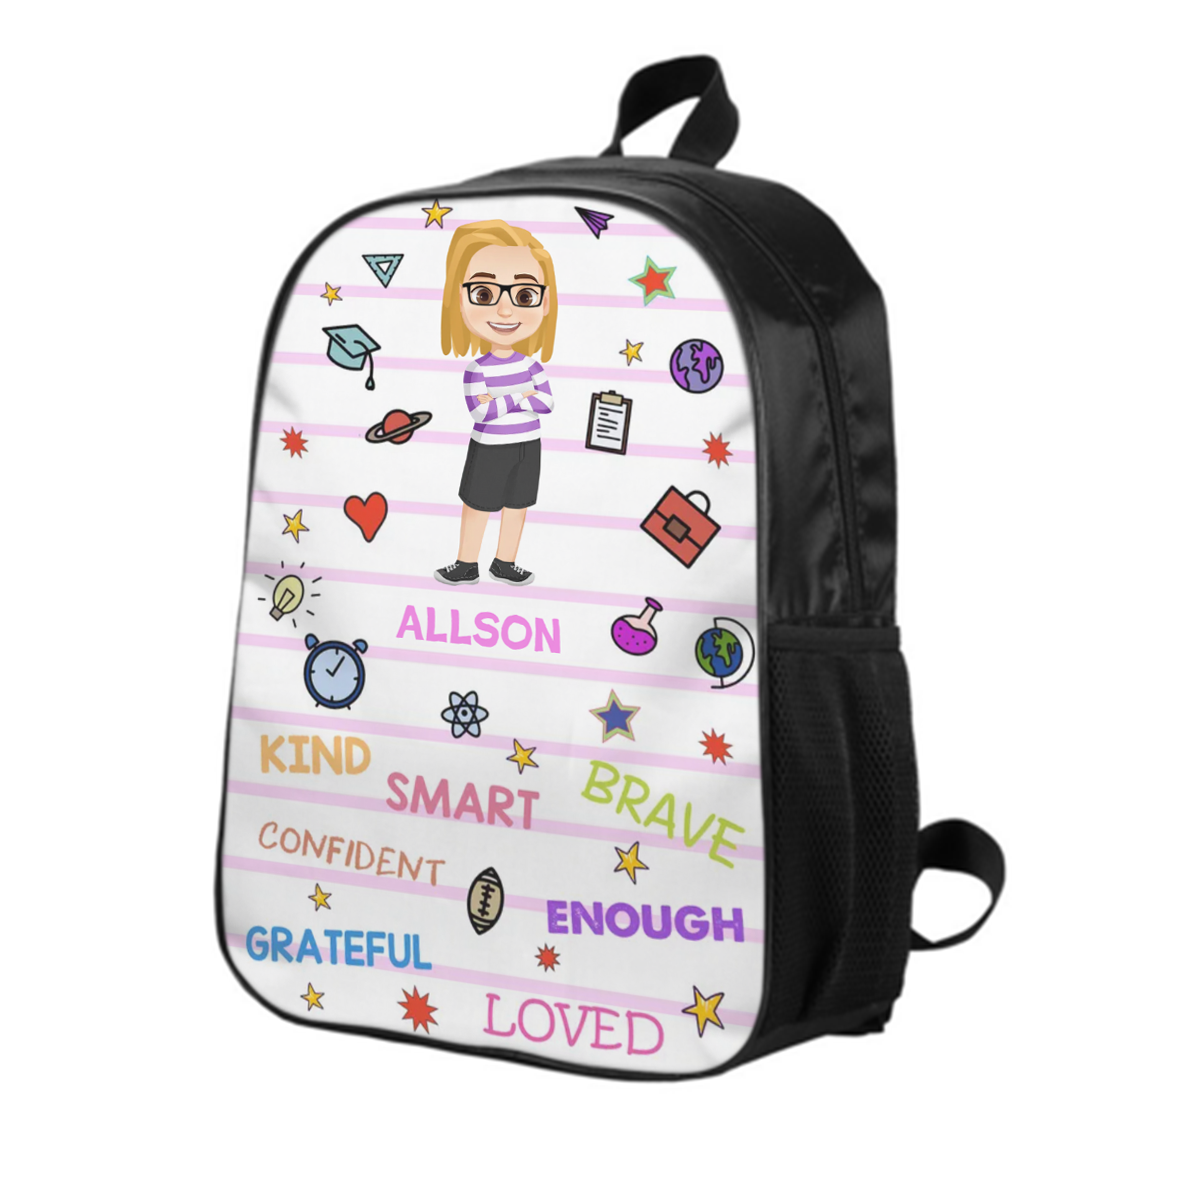 I'm Kind Smart Brave Confident - Gift For Kids, Back To School Gift - Personalized Canvas Backpack